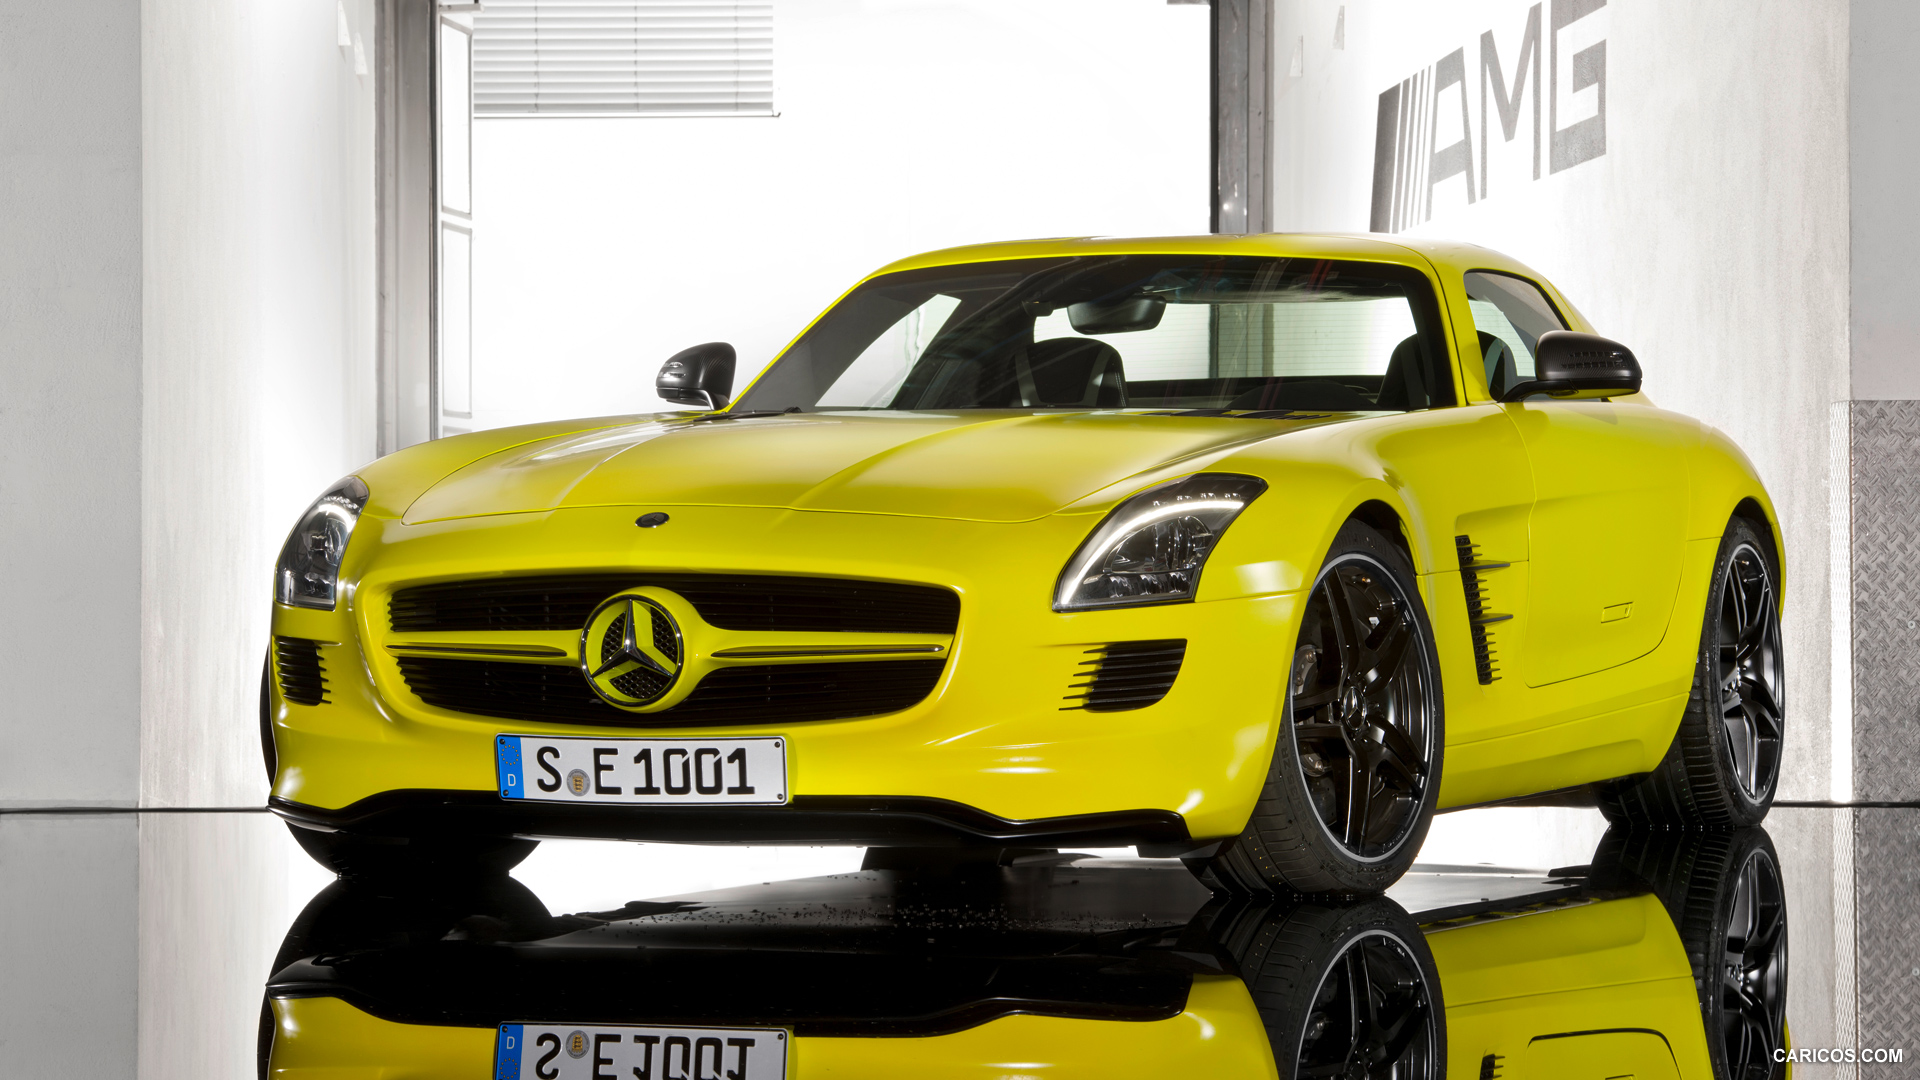 Mercedes-Benz SLS AMG E-CELL Concept  - Front, #43 of 60